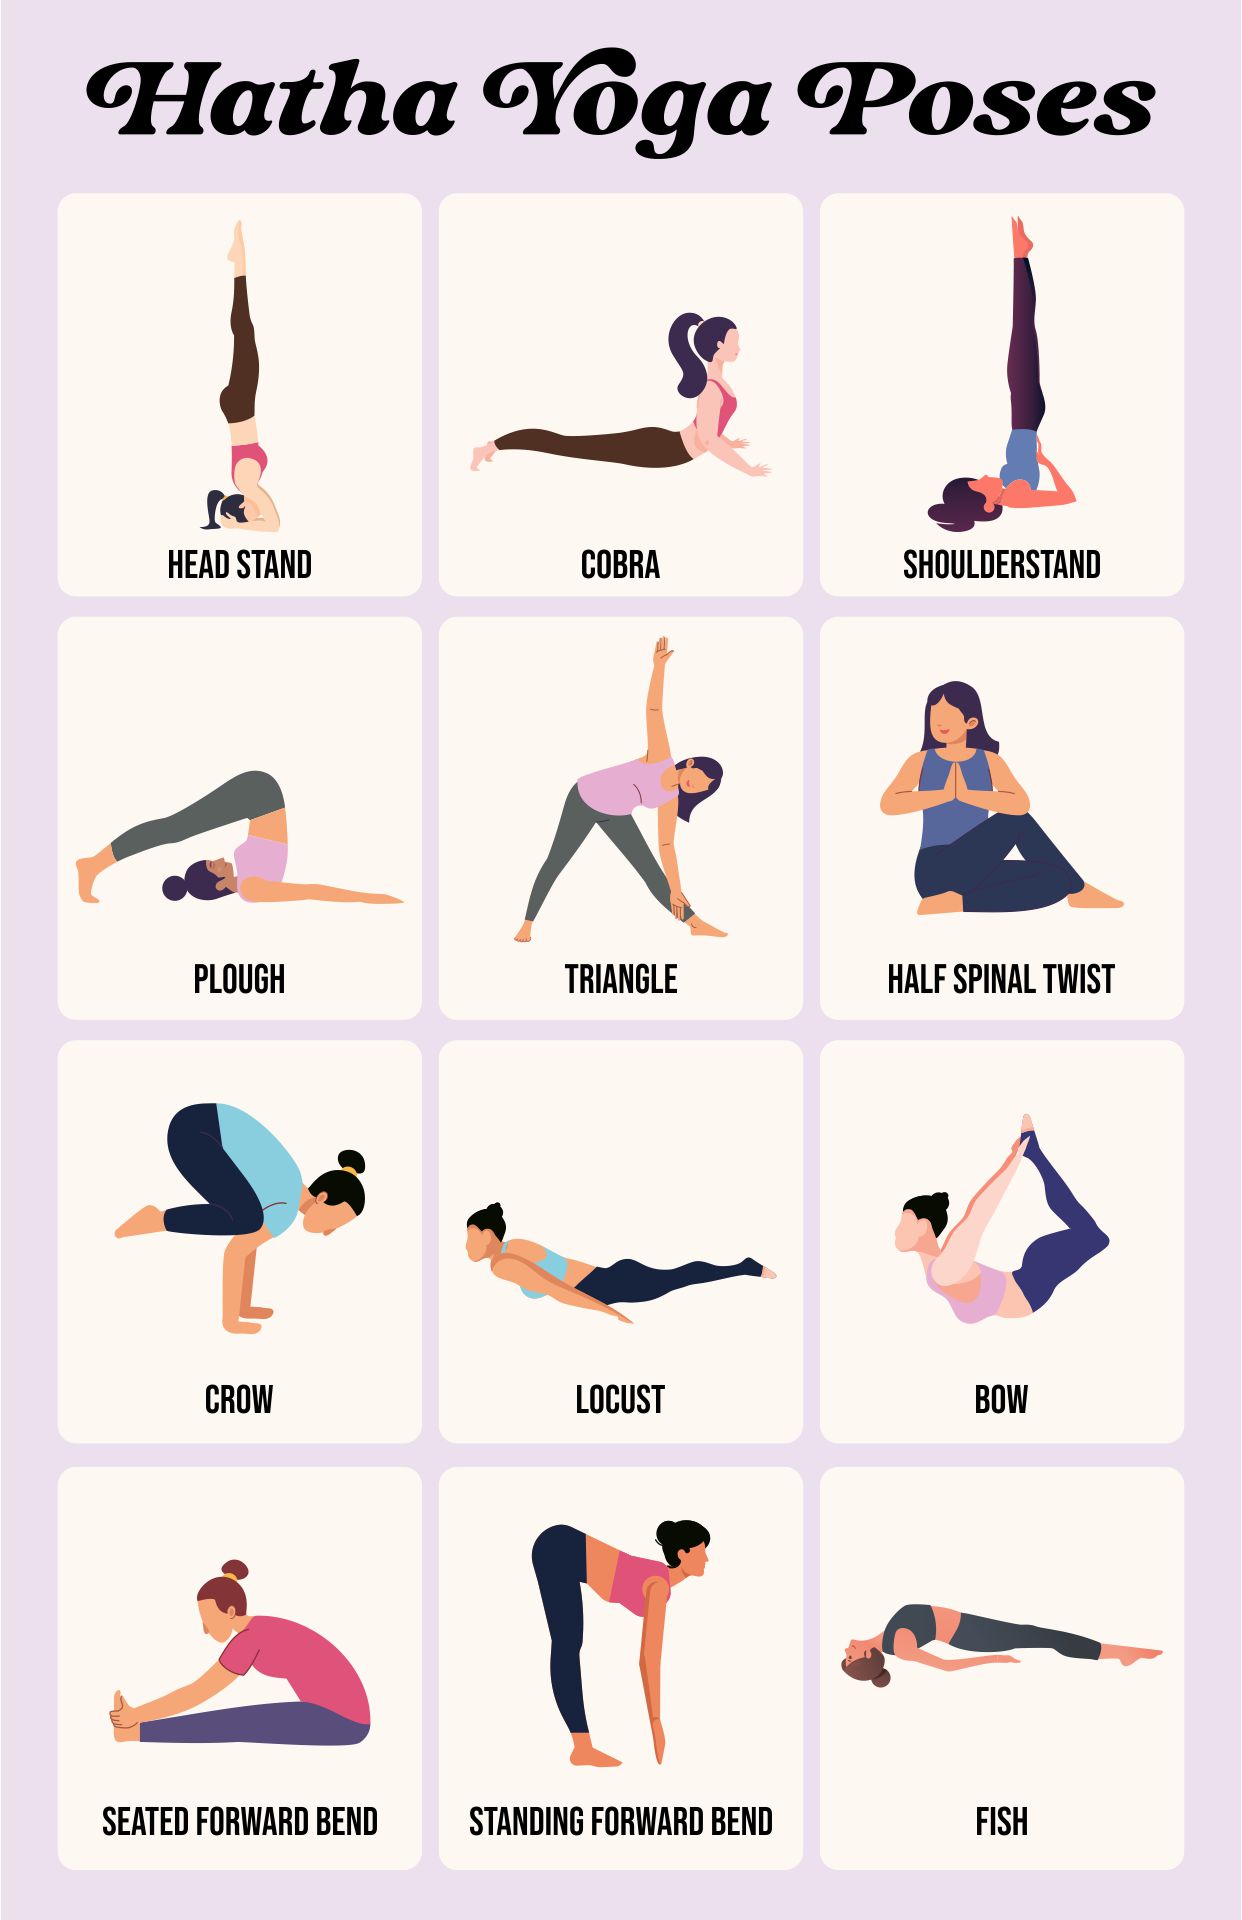 10 Yoga Poses to Do Every Day in You Home Practice